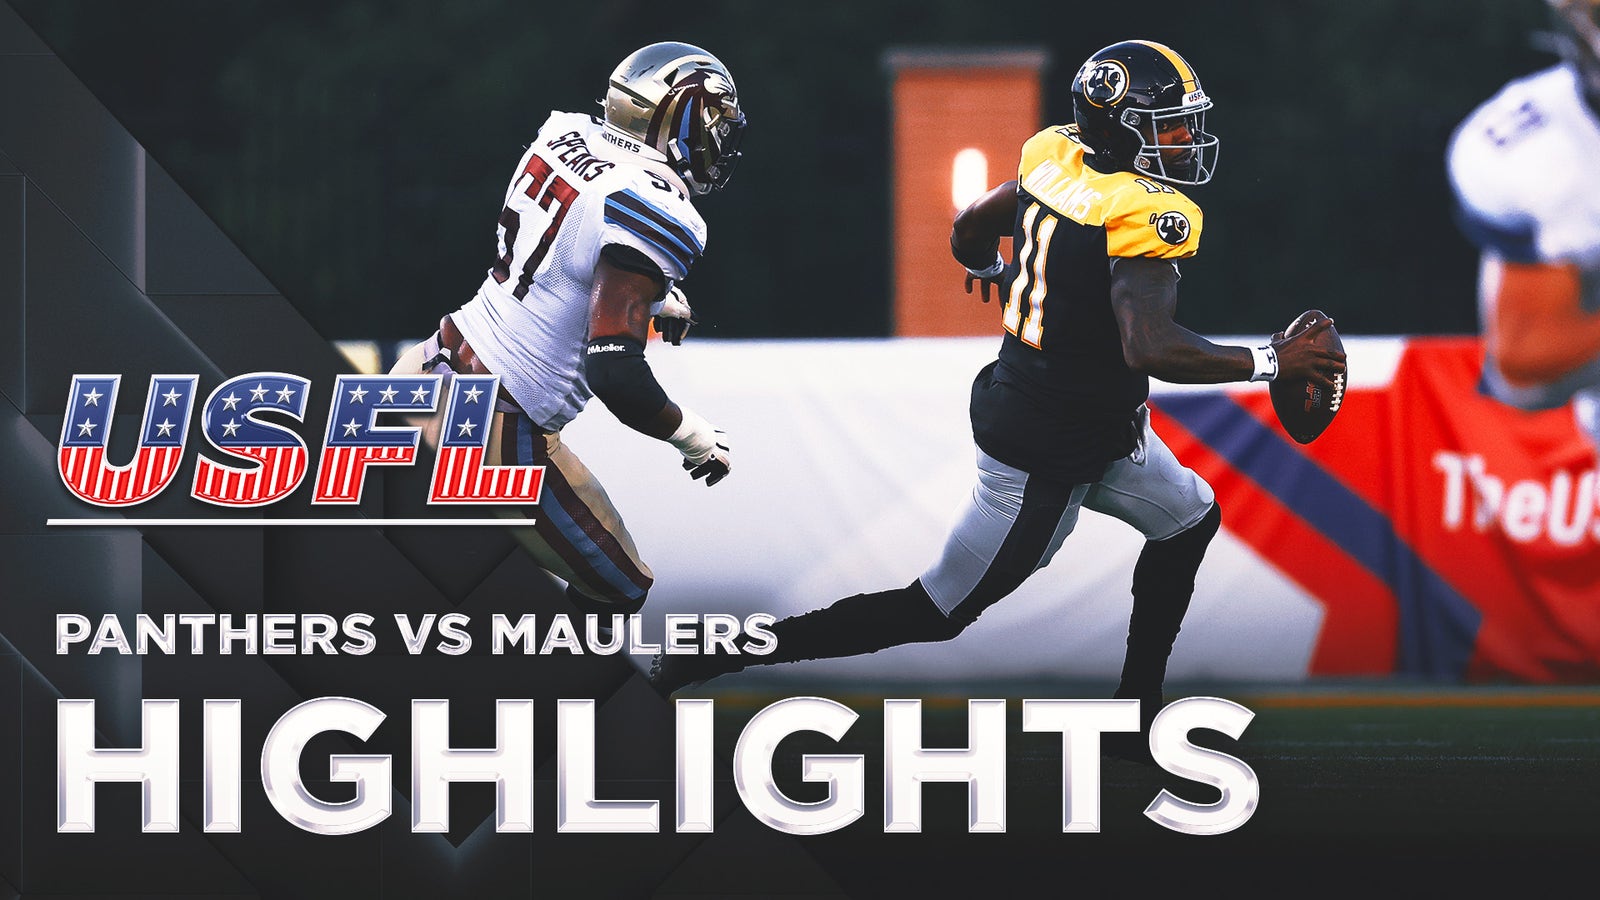 Highlights: Maulers alongside the Panthers in an overtime thriller